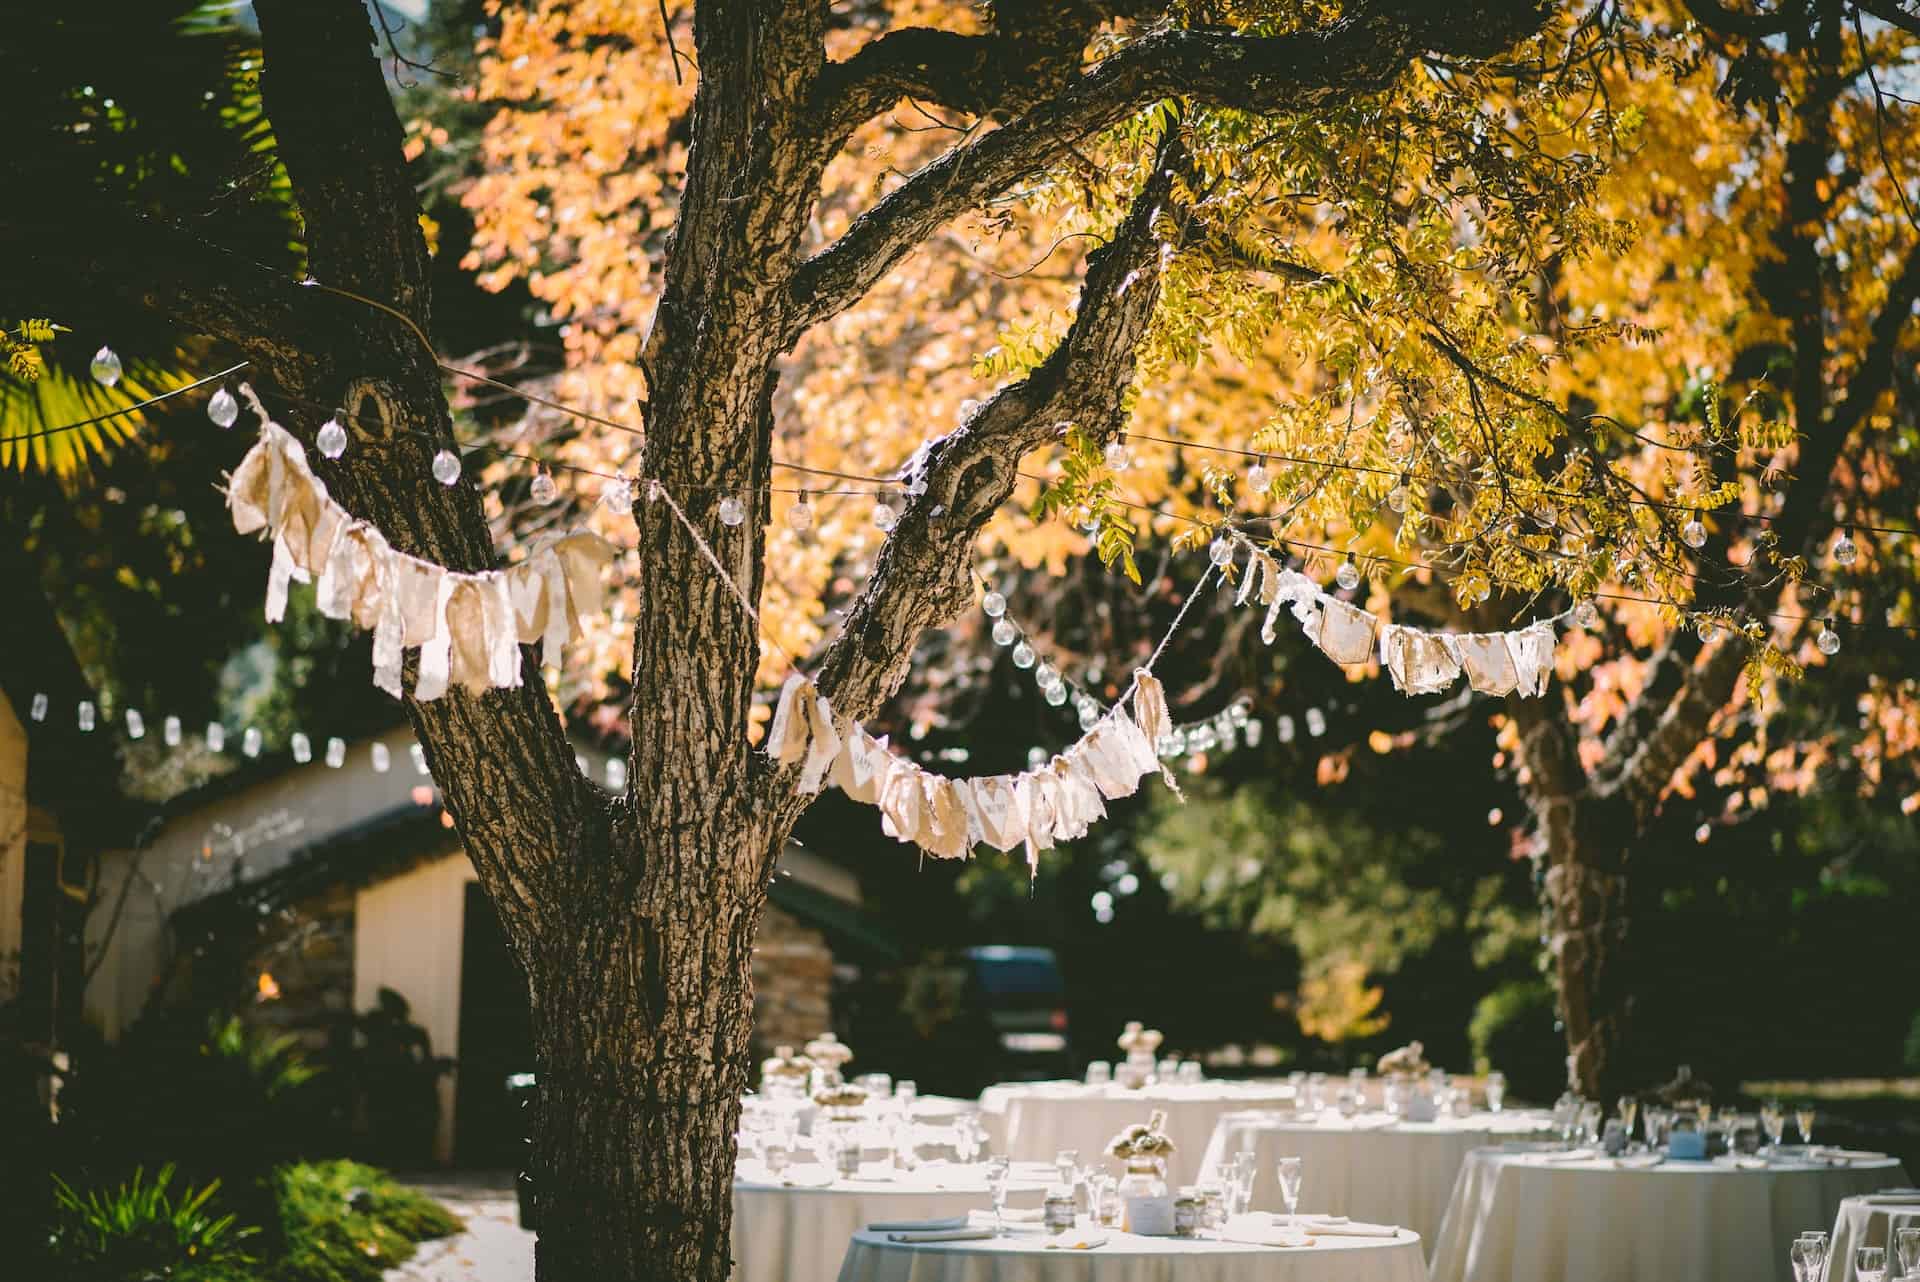 Bridal Shower Decorations That Will Wow Your Guests